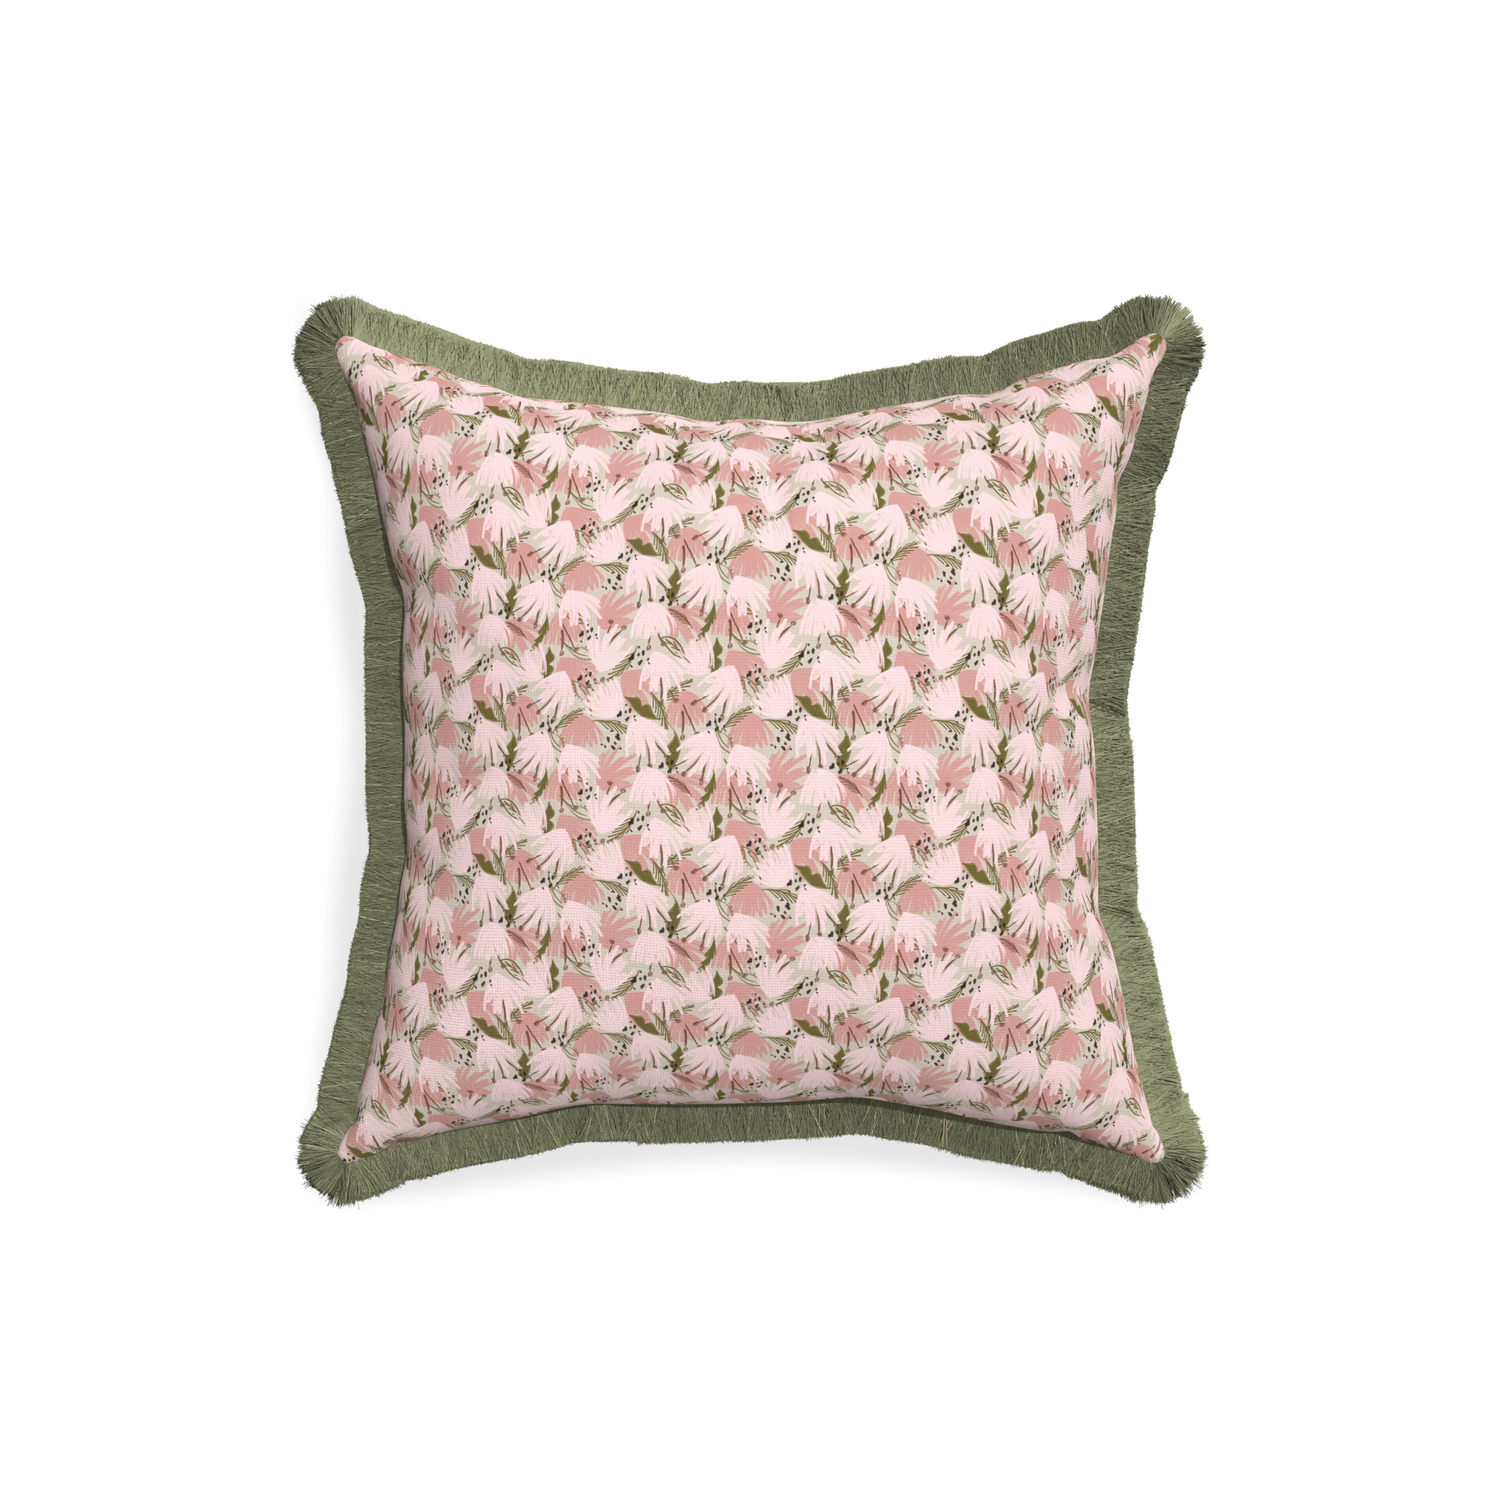 18-square eden pink custom pillow with sage fringe on white background